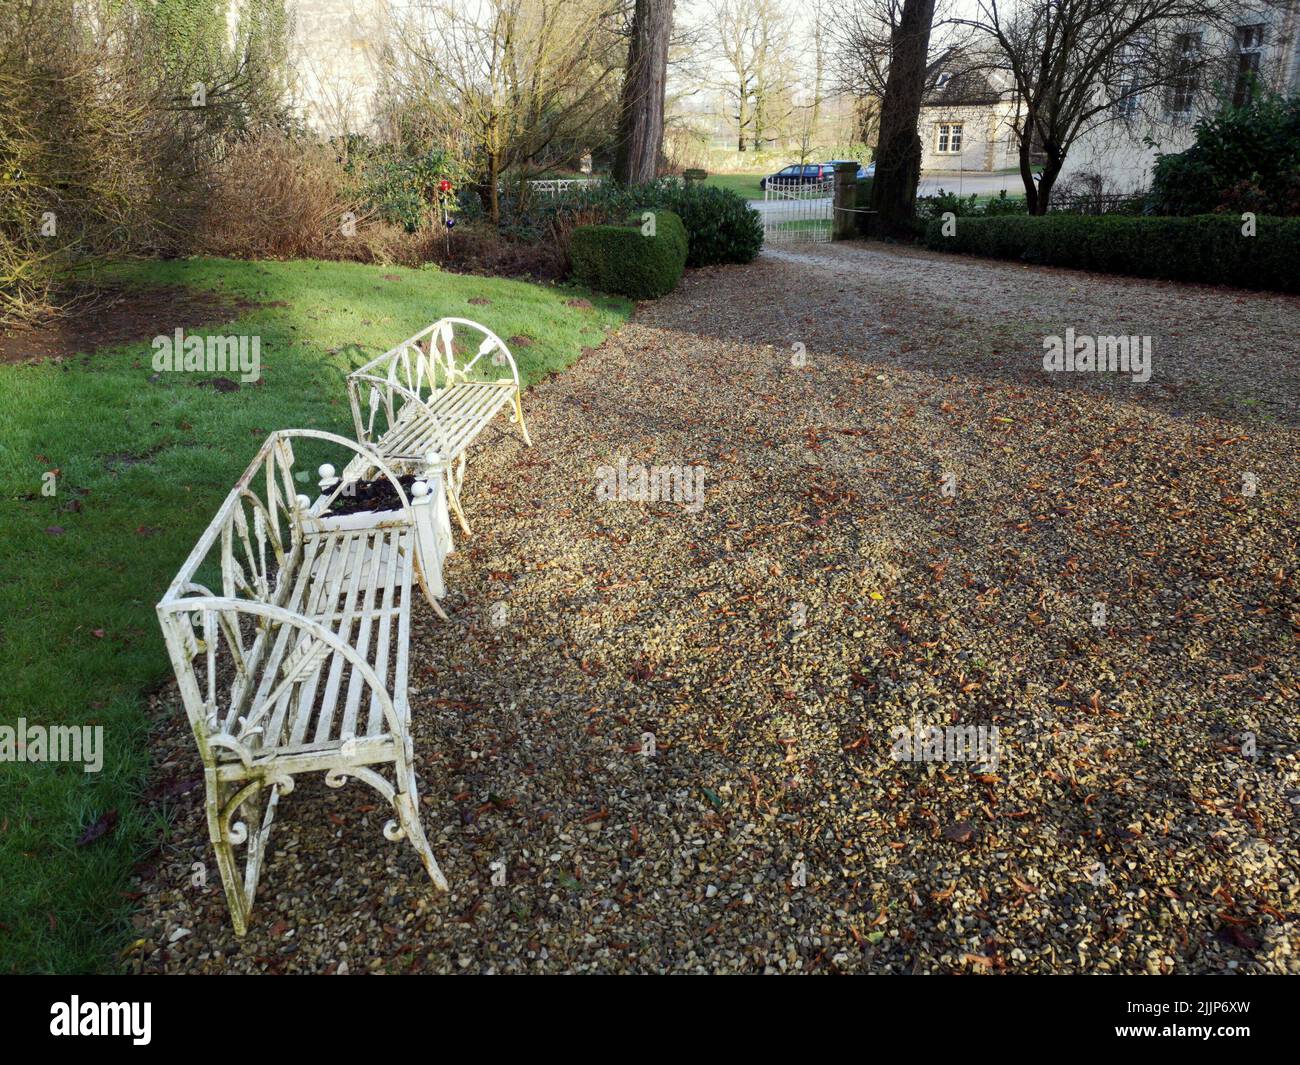 A view of white painted benches in a park Stock Photo